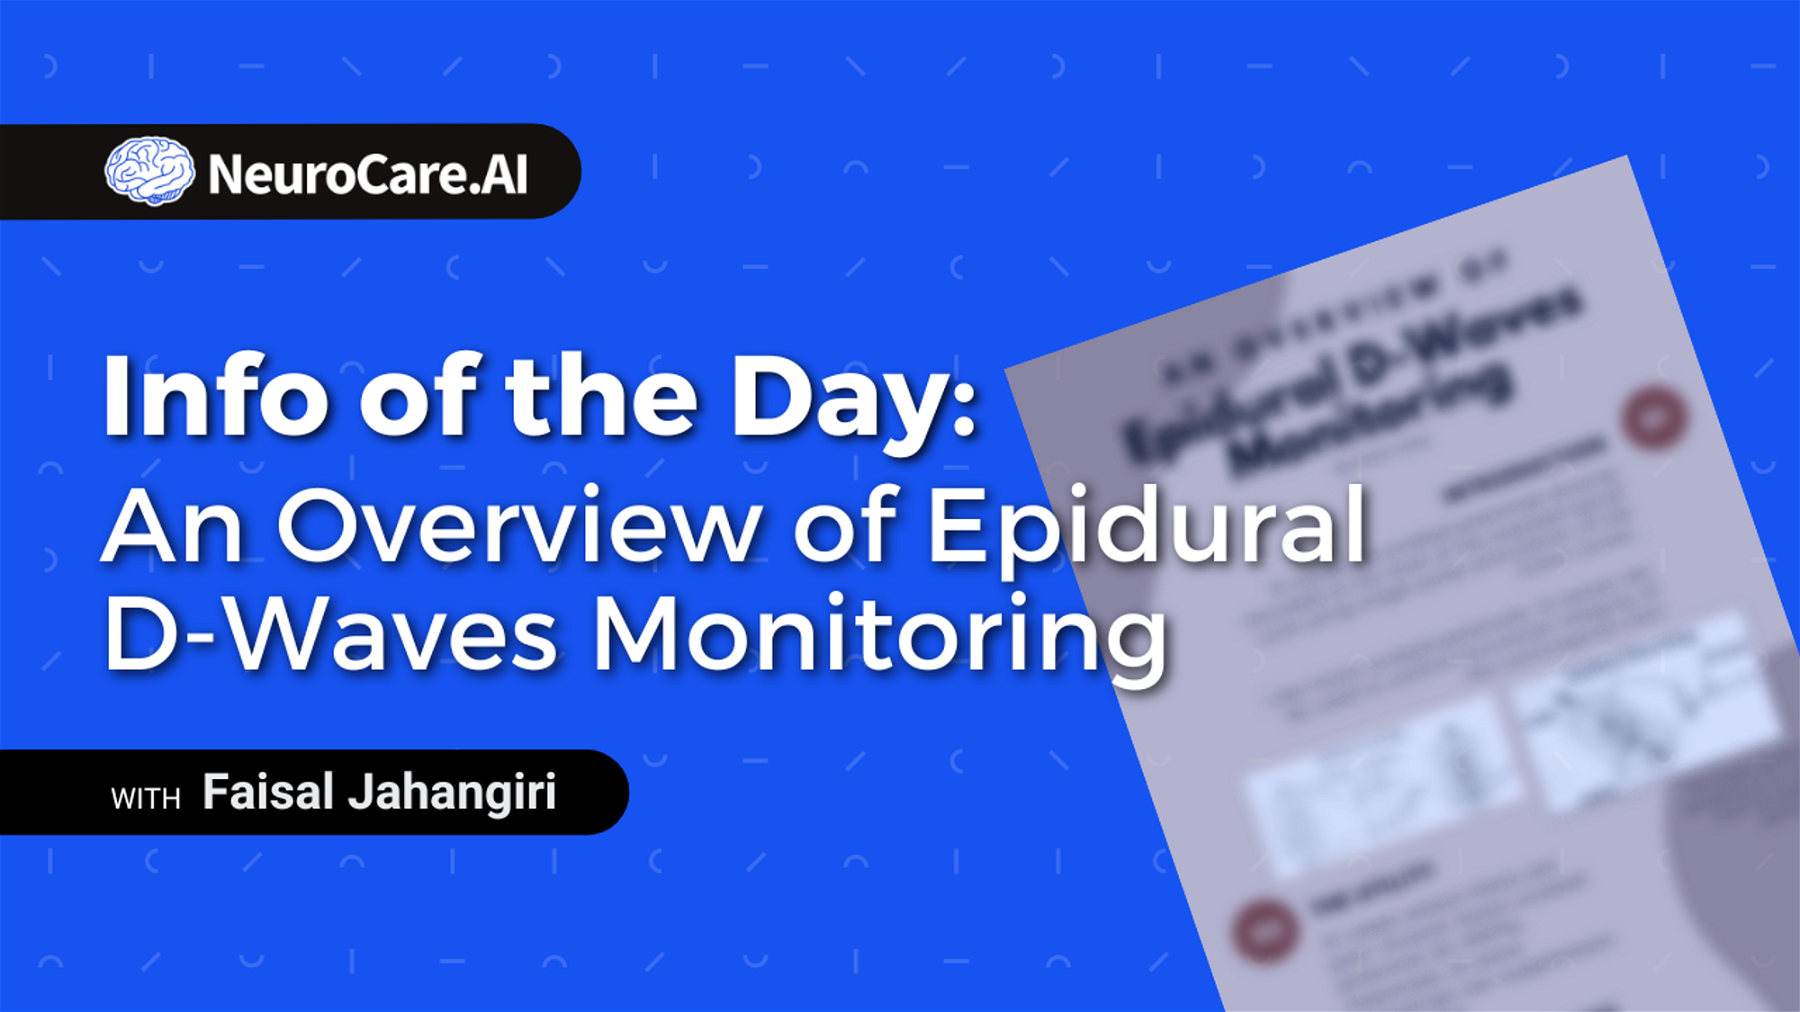 Info of the Day: "An Overview of Epidural D-Waves Monitoring"